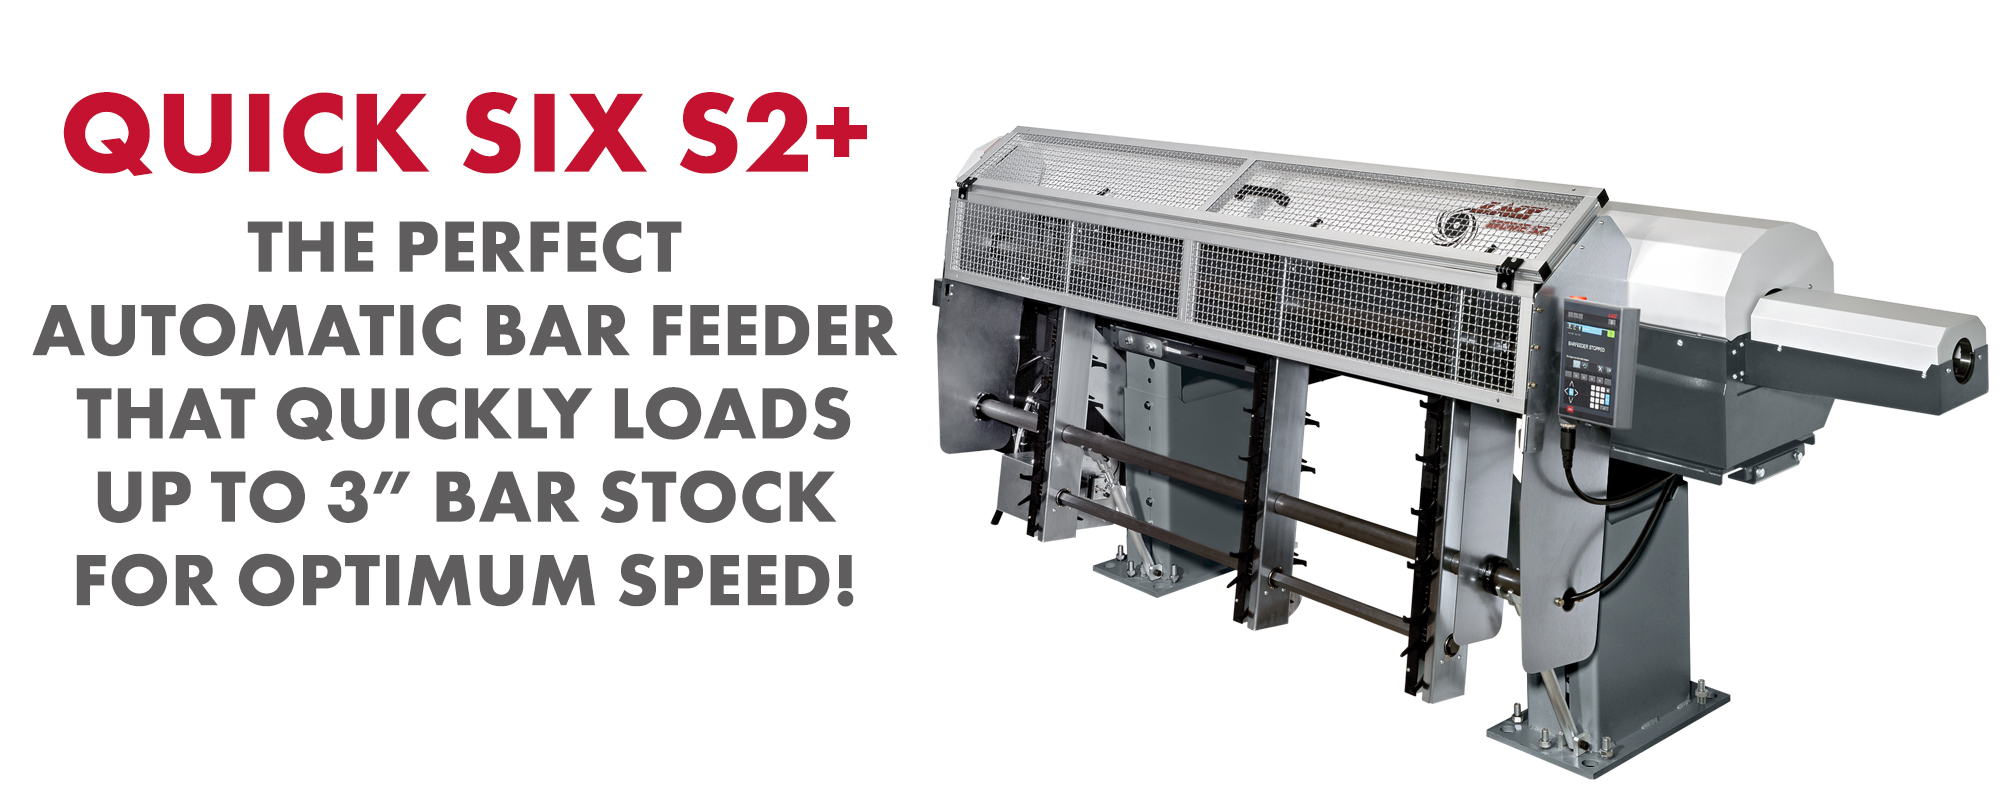 Quick Six S2+ Bar Feeder: Perfect Solution to Load 3 Bar Stock